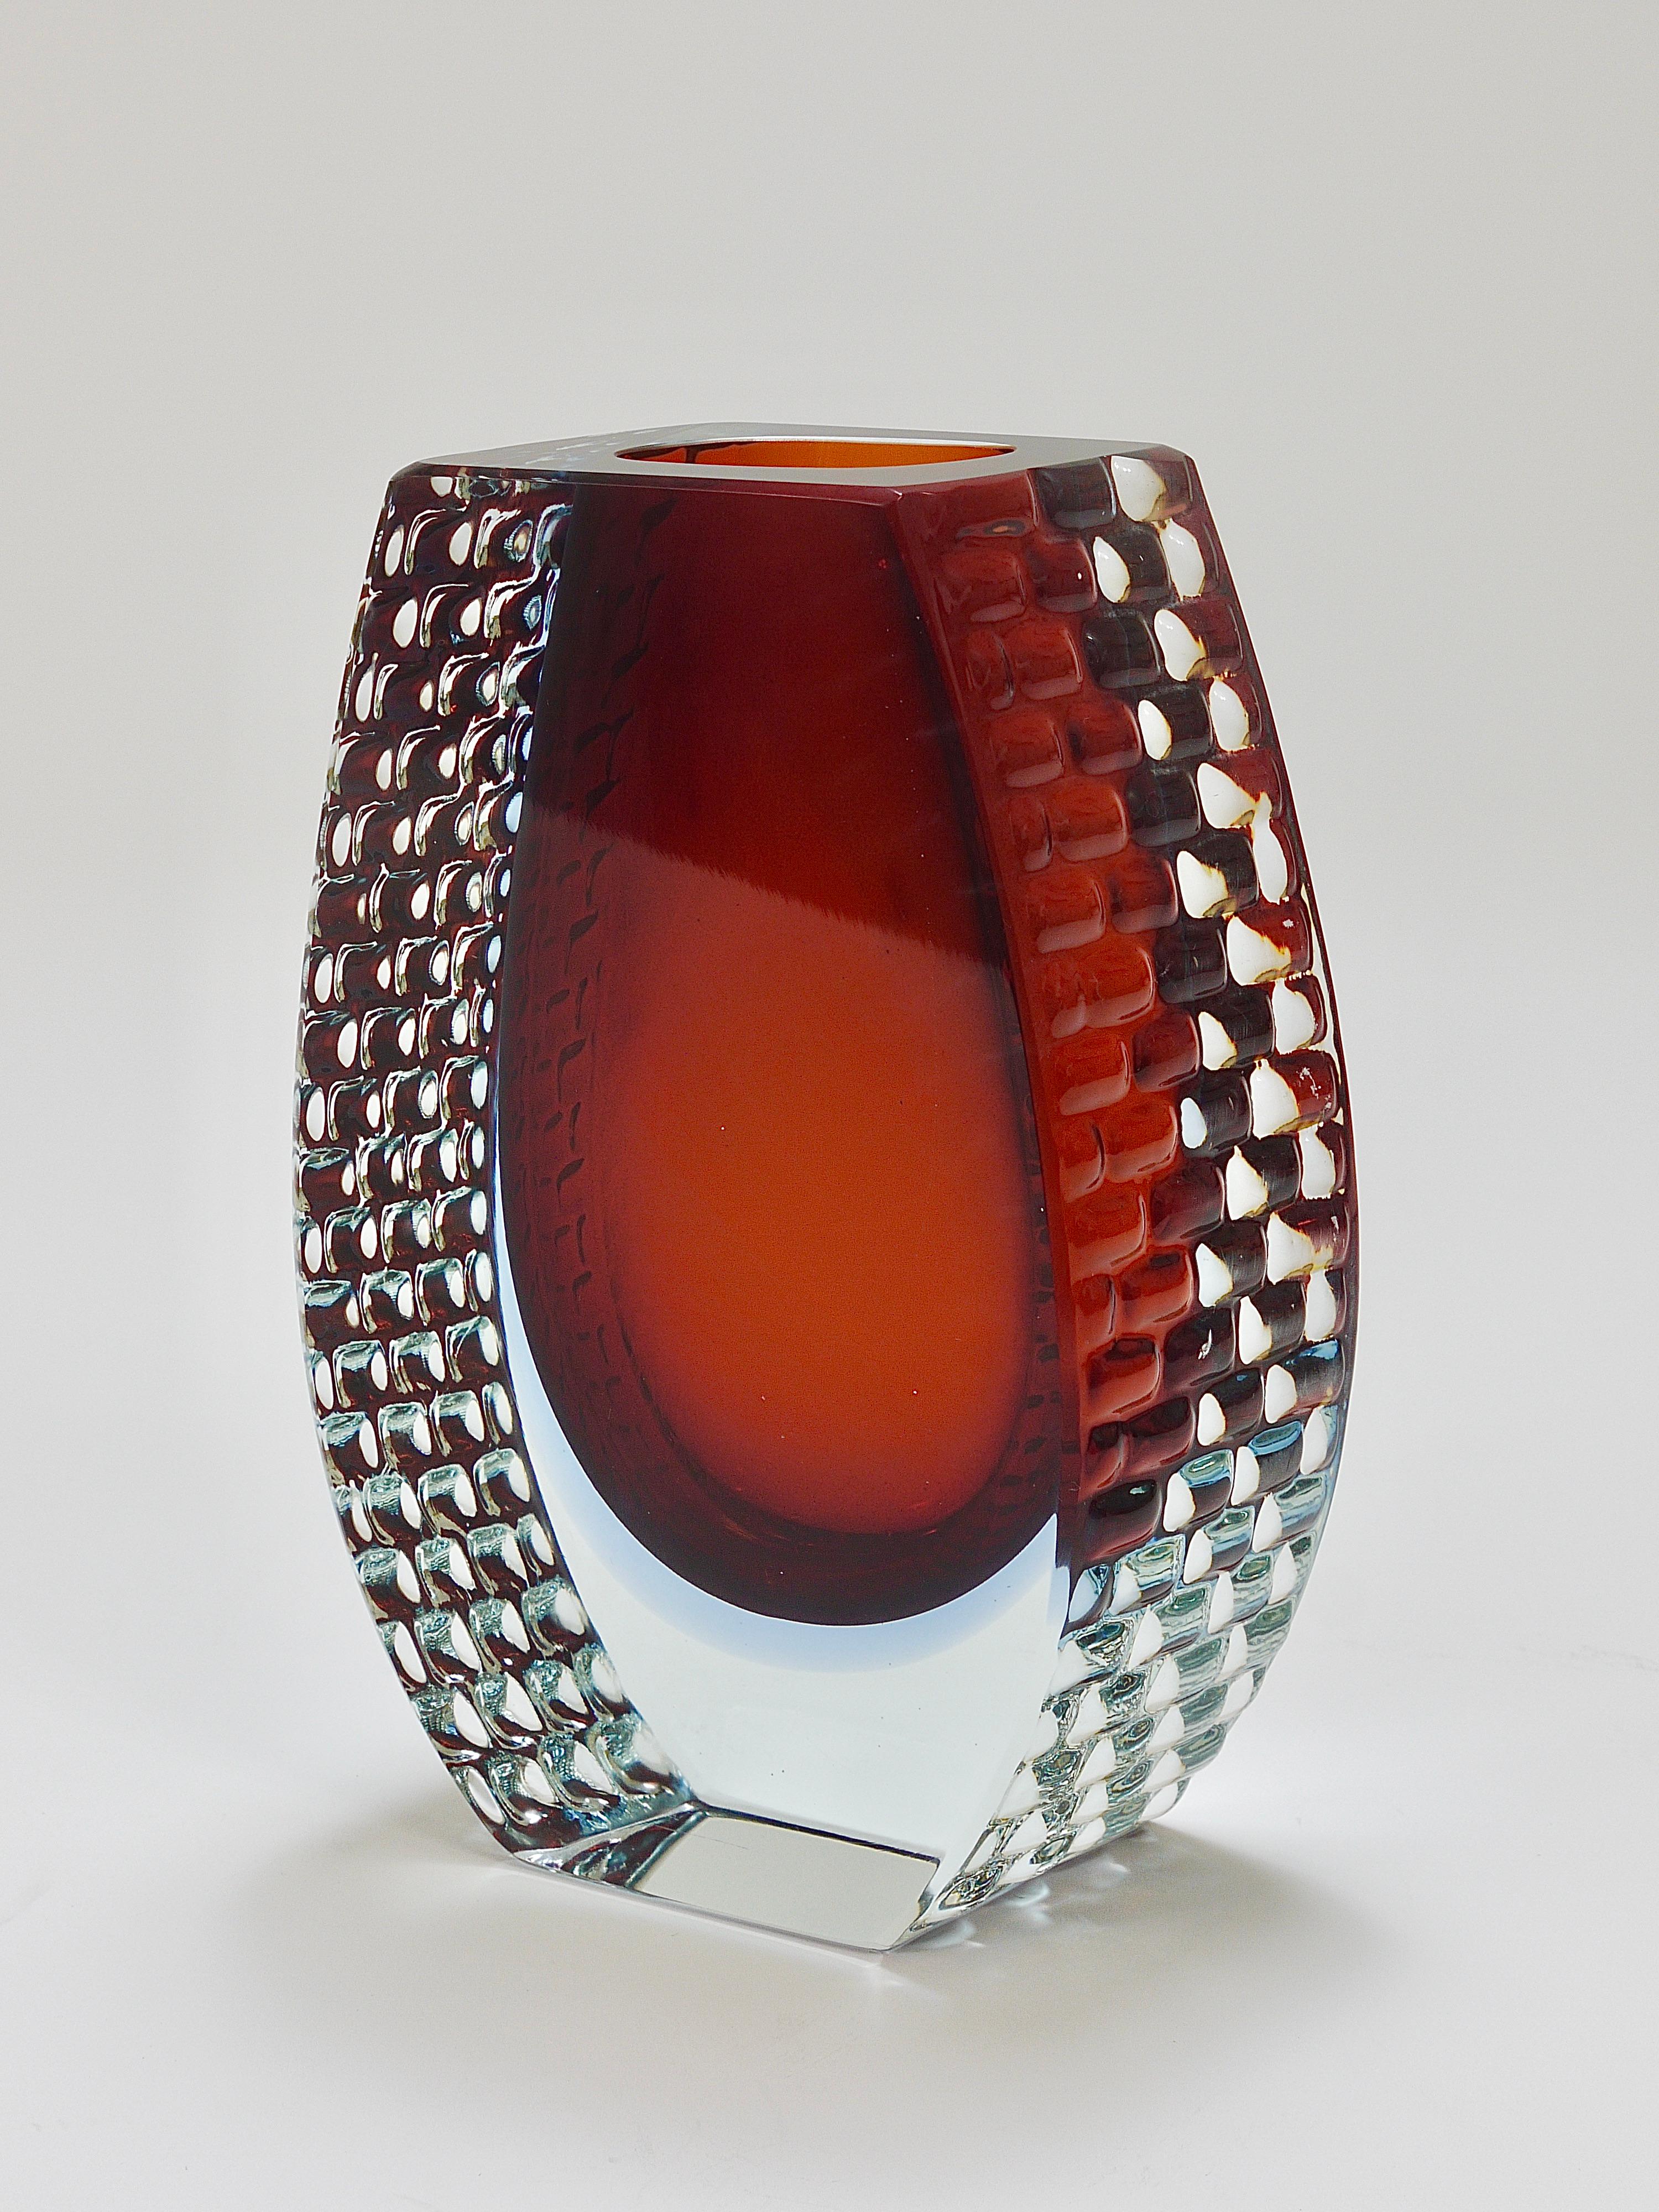 Large Mandruzzato Sommerso Murano Textured Facetted Art Glass Vase, Italy, 1970s For Sale 5